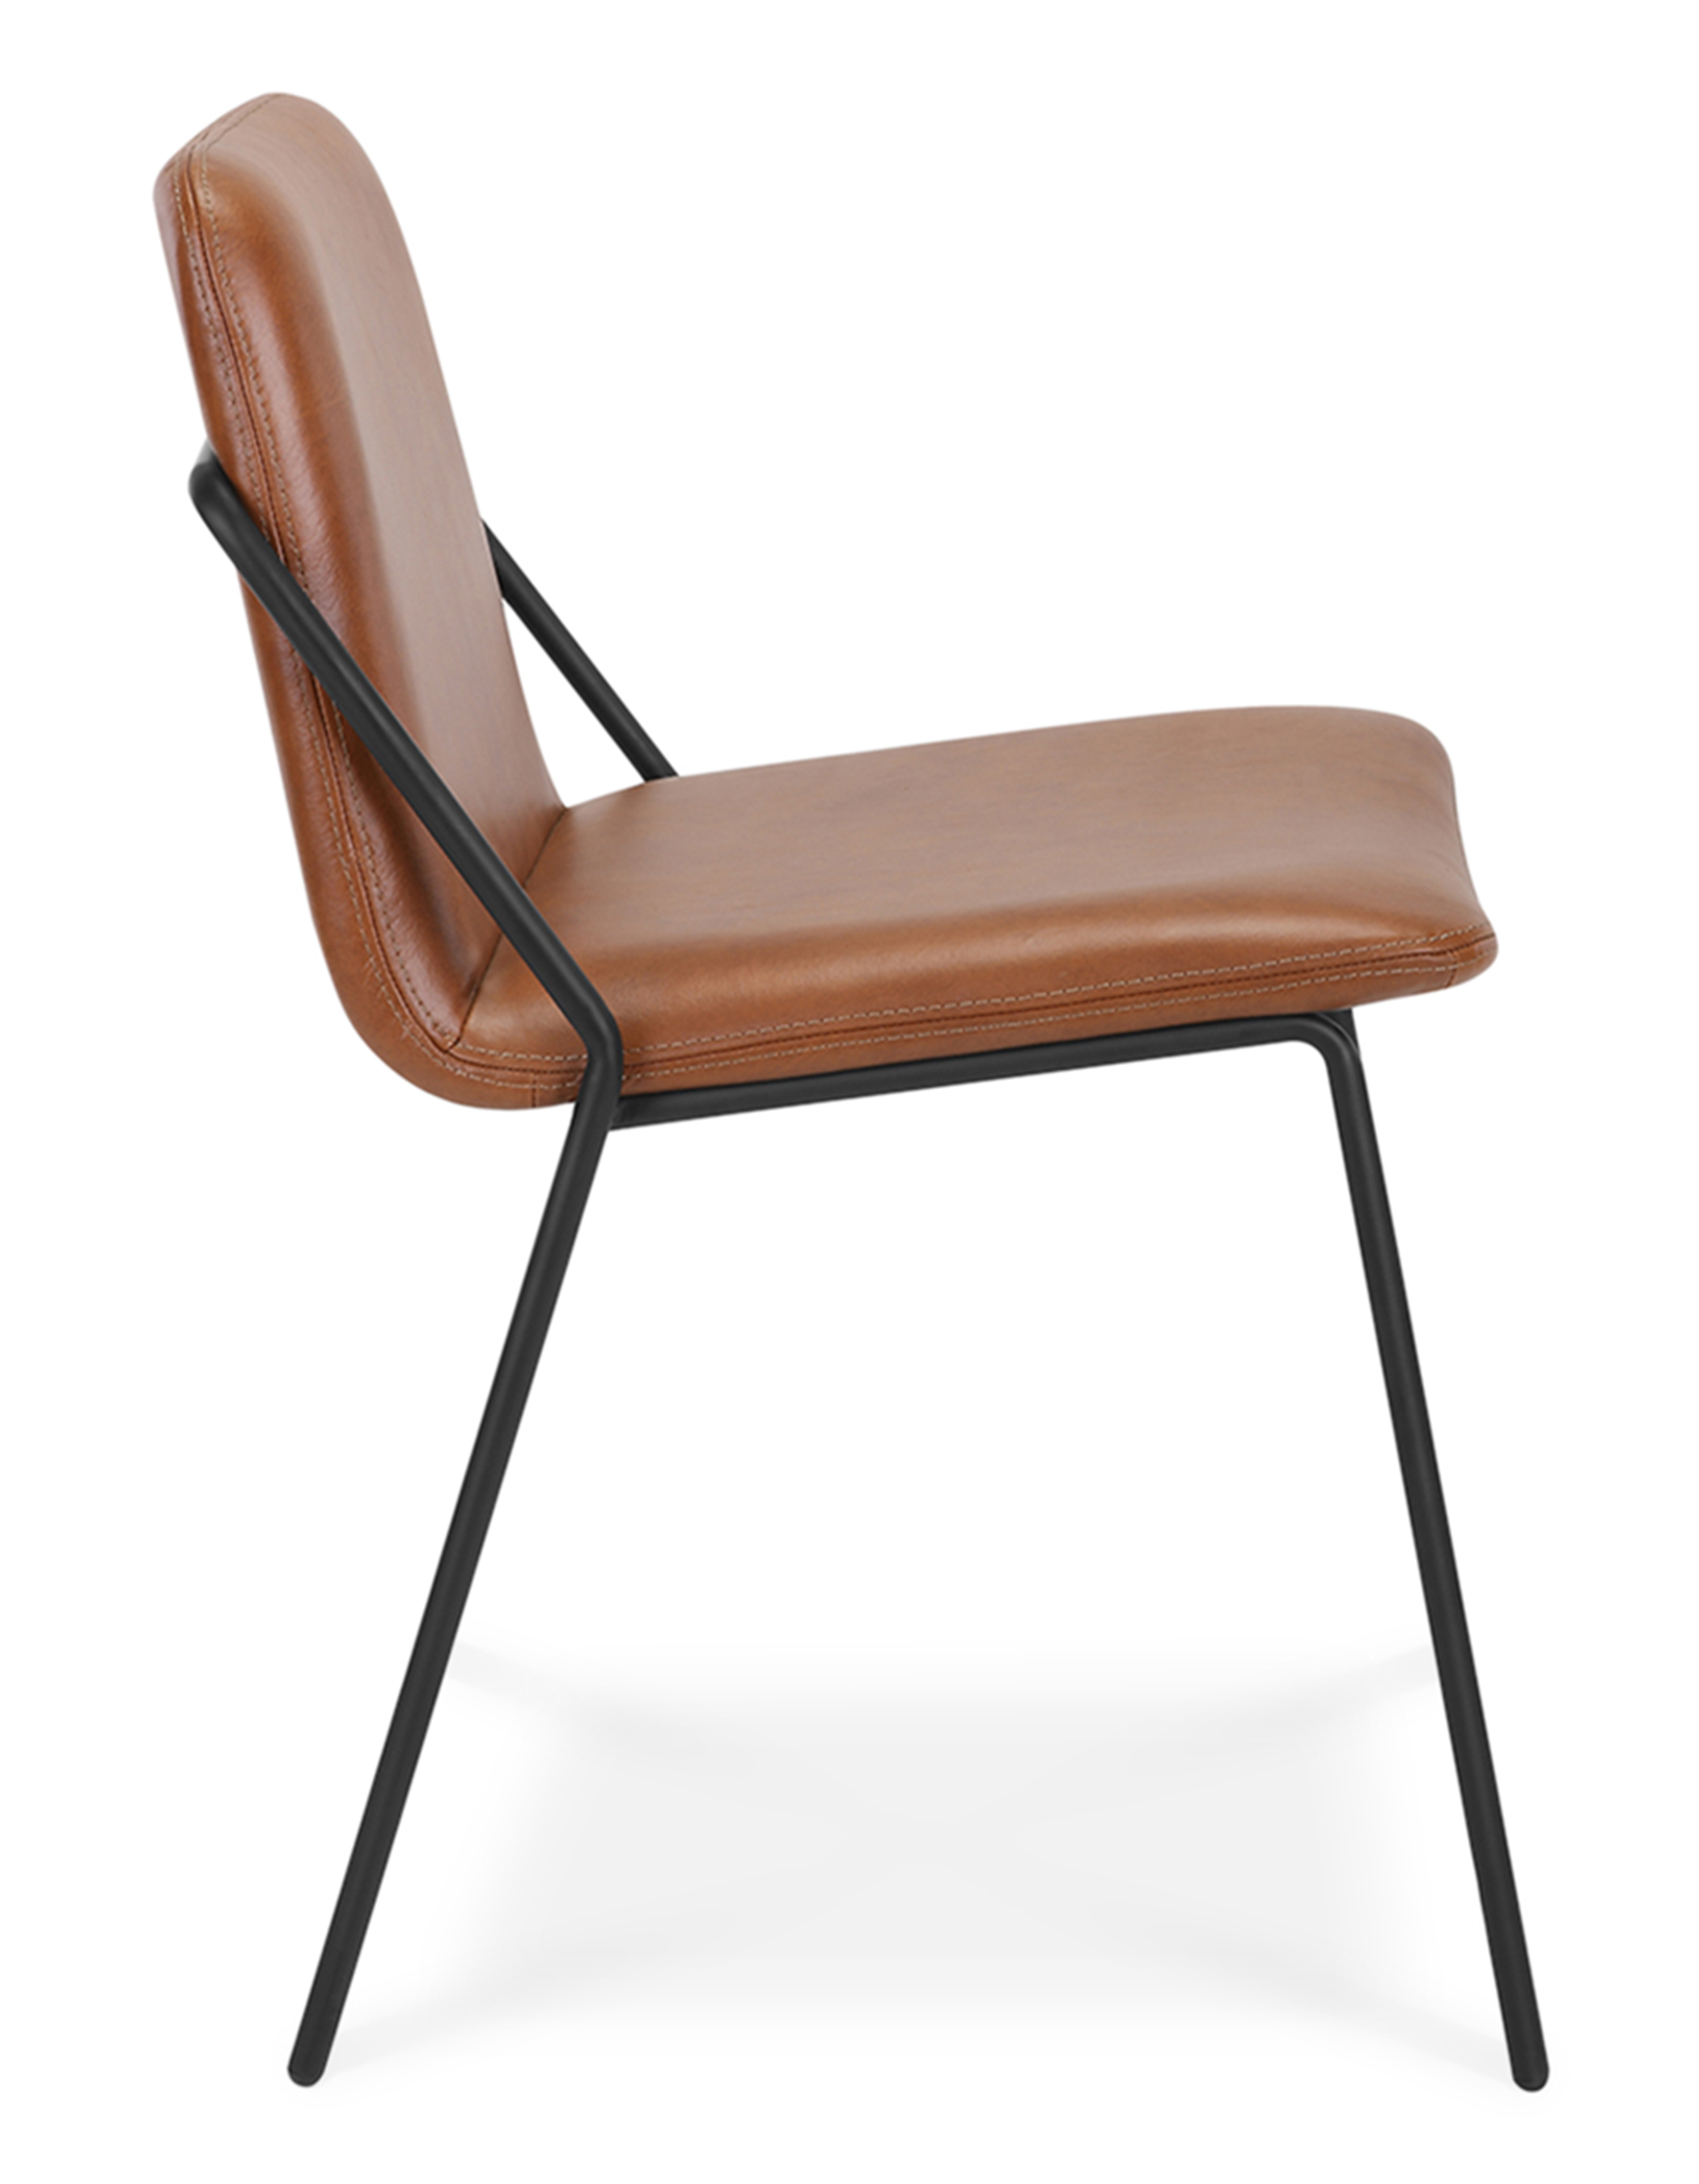 WS - Sling side chair - Upholstered PU leather (Side)